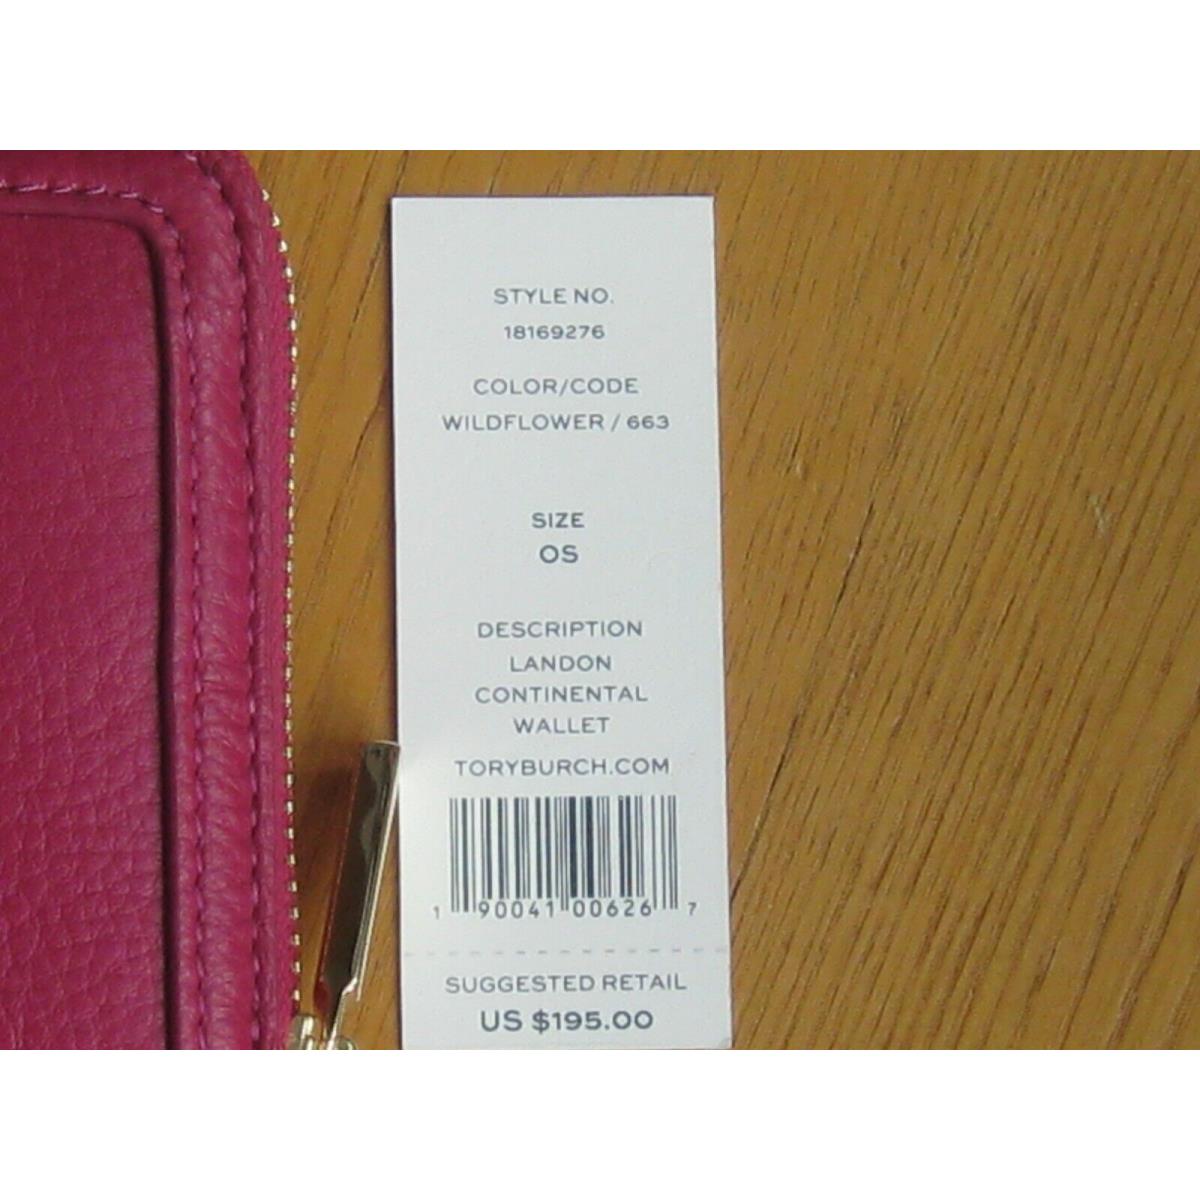 Tory Burch Landon Leather Zip Continental Wallet Wildflower Pink - Insured  | 190041006267 - Tory Burch wallet - Pink | Fash Direct